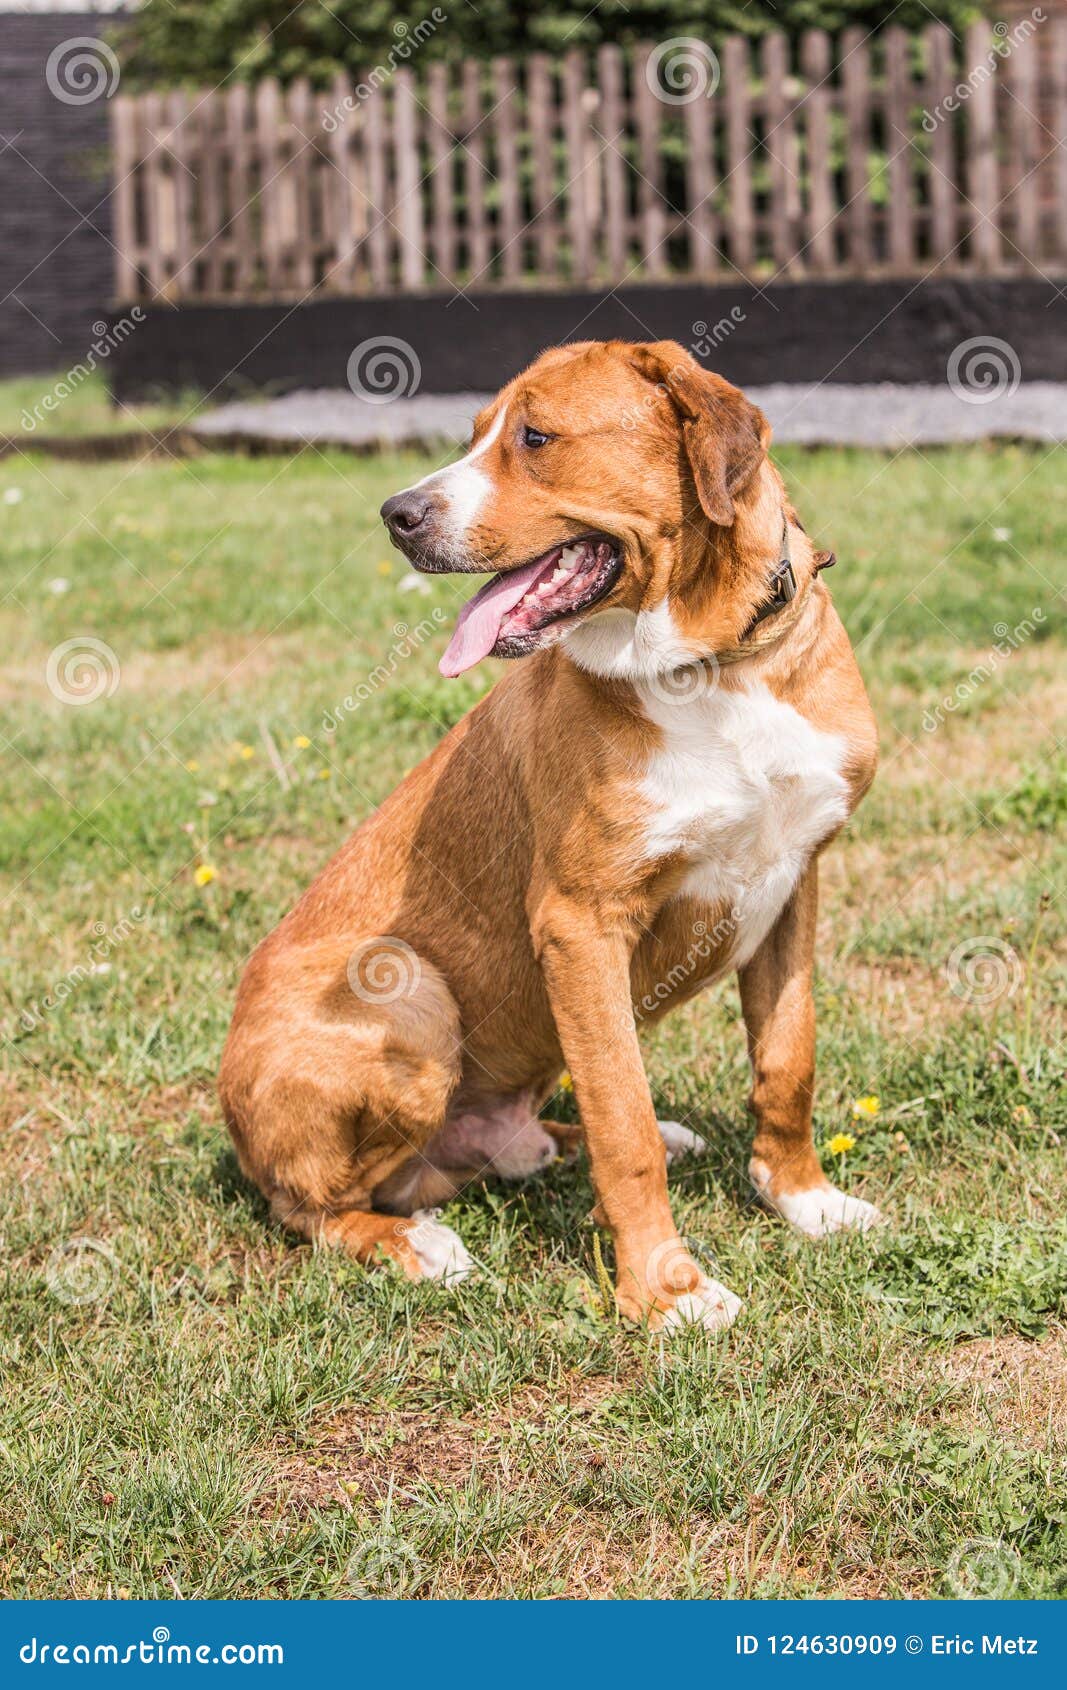 Greater Swiss Mountain Dog Living In Belgium Stock Image Image Of Outdoor Cattle 124630909